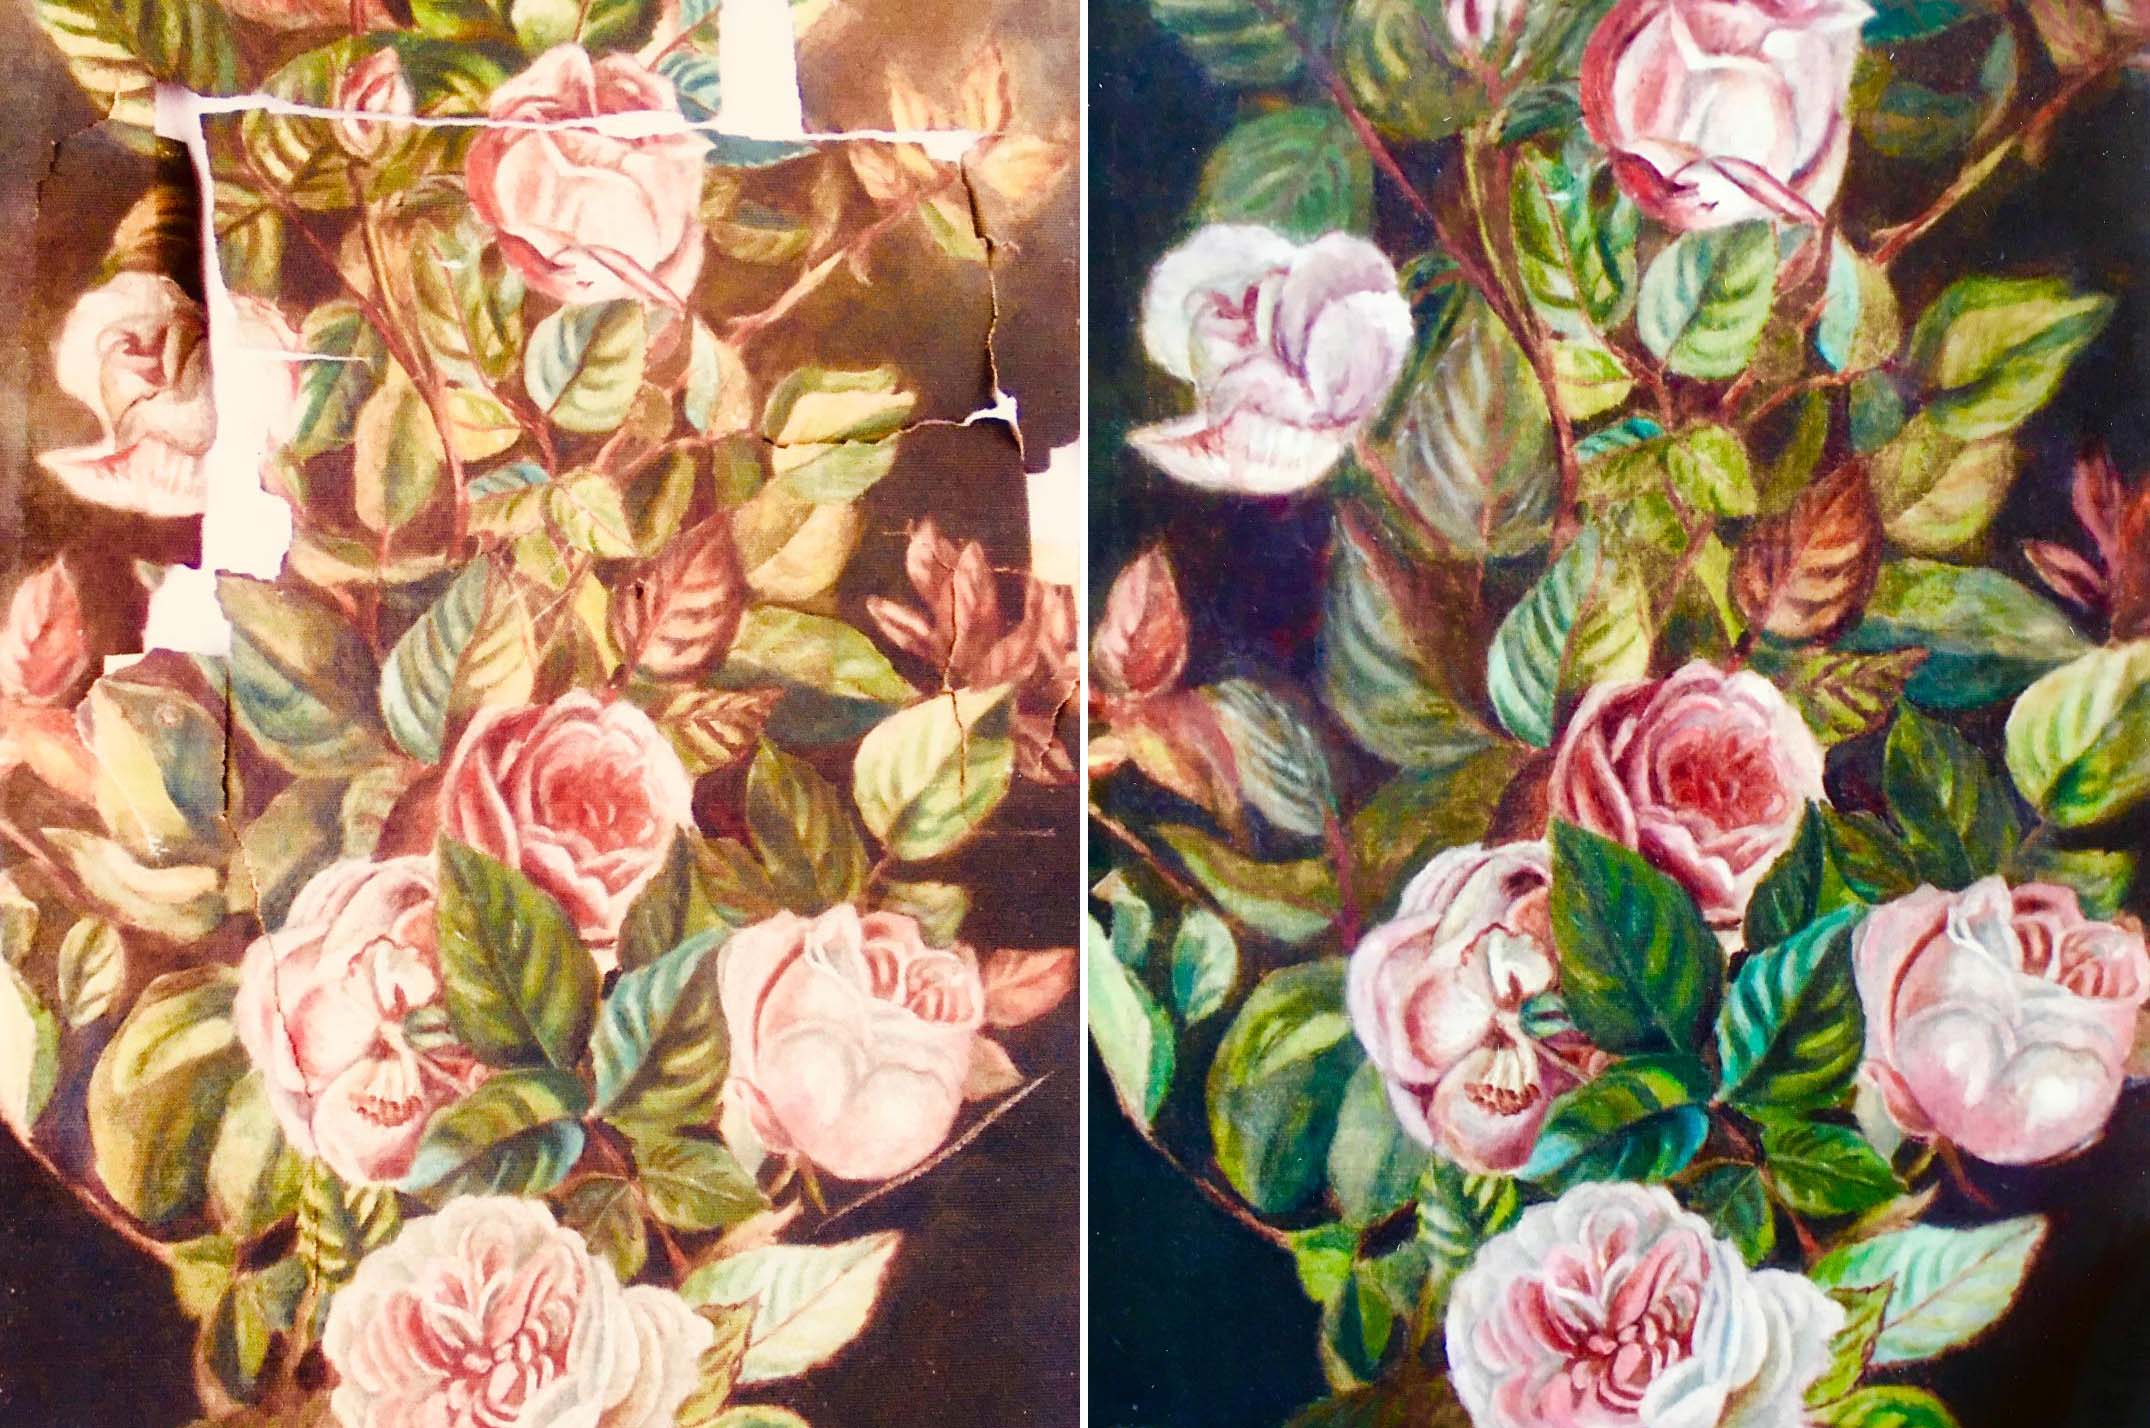 A painting of roses and leaves on the side of a wall.